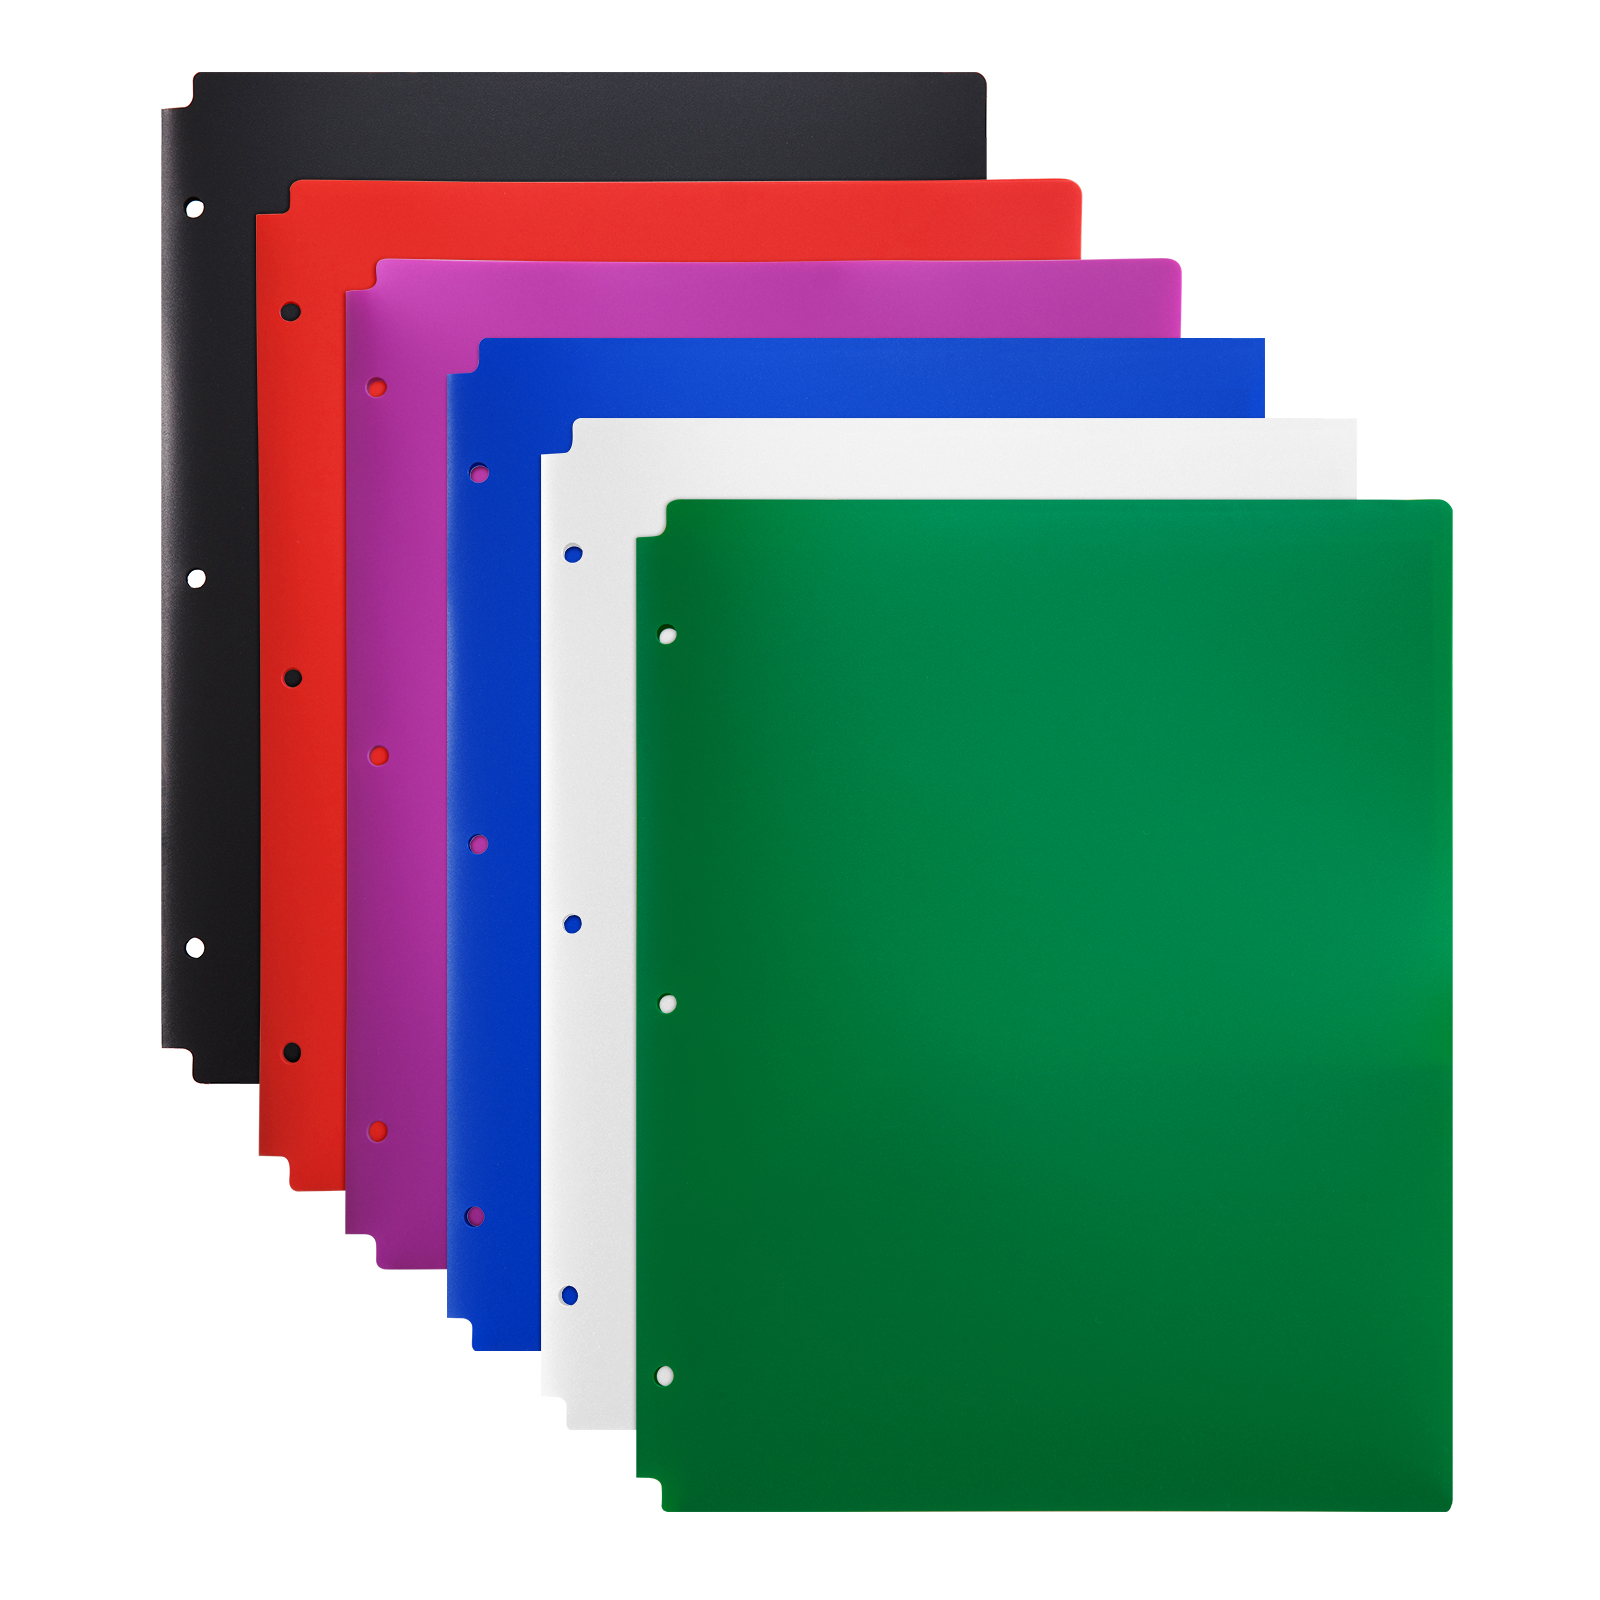 Comix Plastic Folders with Pockets,Poly 2 Pockets File Folder with 3 Holes Letter Size, Fits 3 Ring Binder for Office School Folders - 12 Pack 6 Assorted Colors